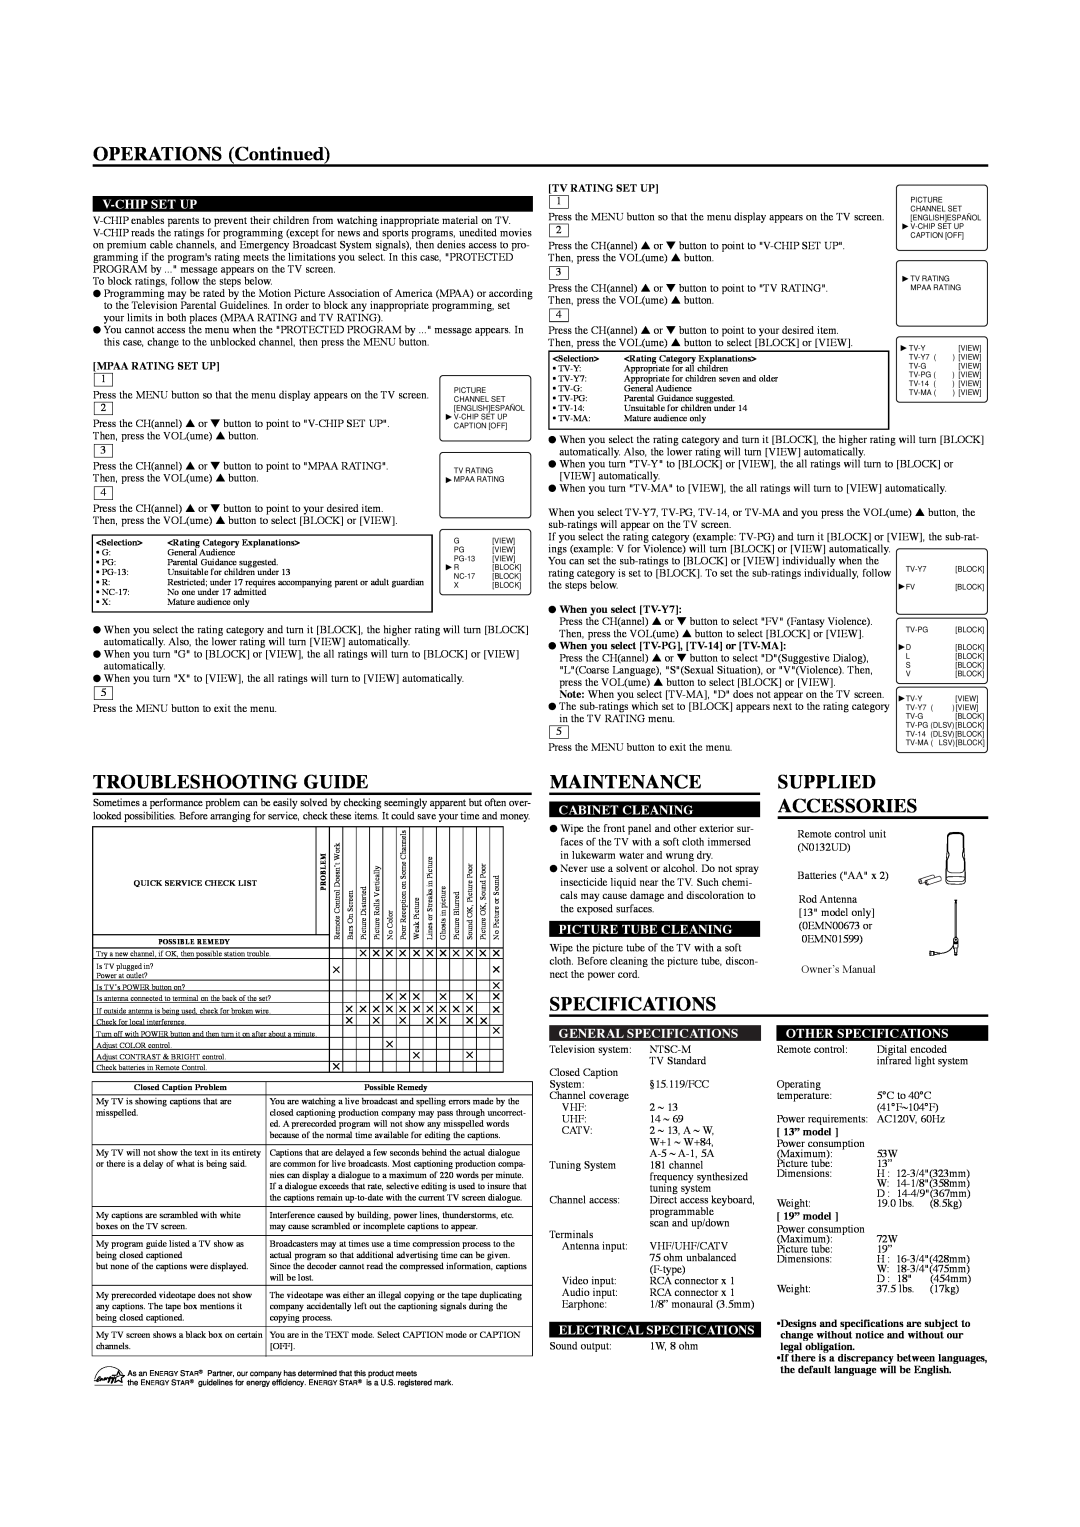 Sylvania 6413TC, 6419TC OPERATIONS Continued, Troubleshooting Guide, Maintenance, Supplied Accessories, Specifications 